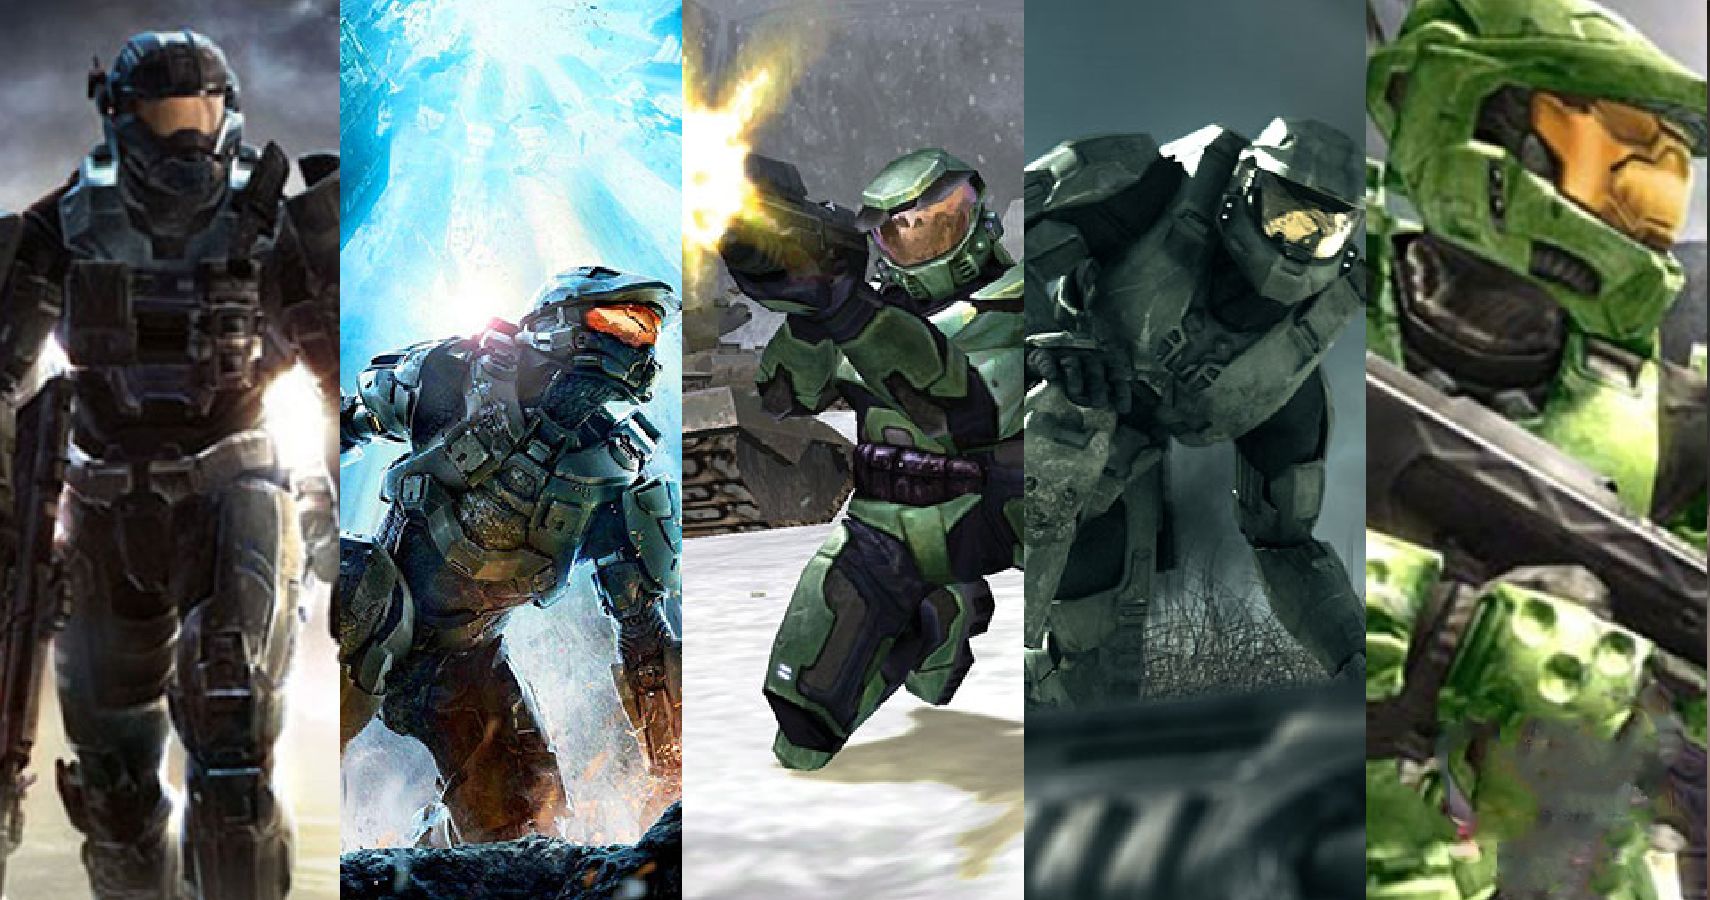 Halo Codex on X: All the metacritic scores for the main Halo games. #halo  #halo2 #halo3 #halo4 #halo5 #HaloInfinite  / X